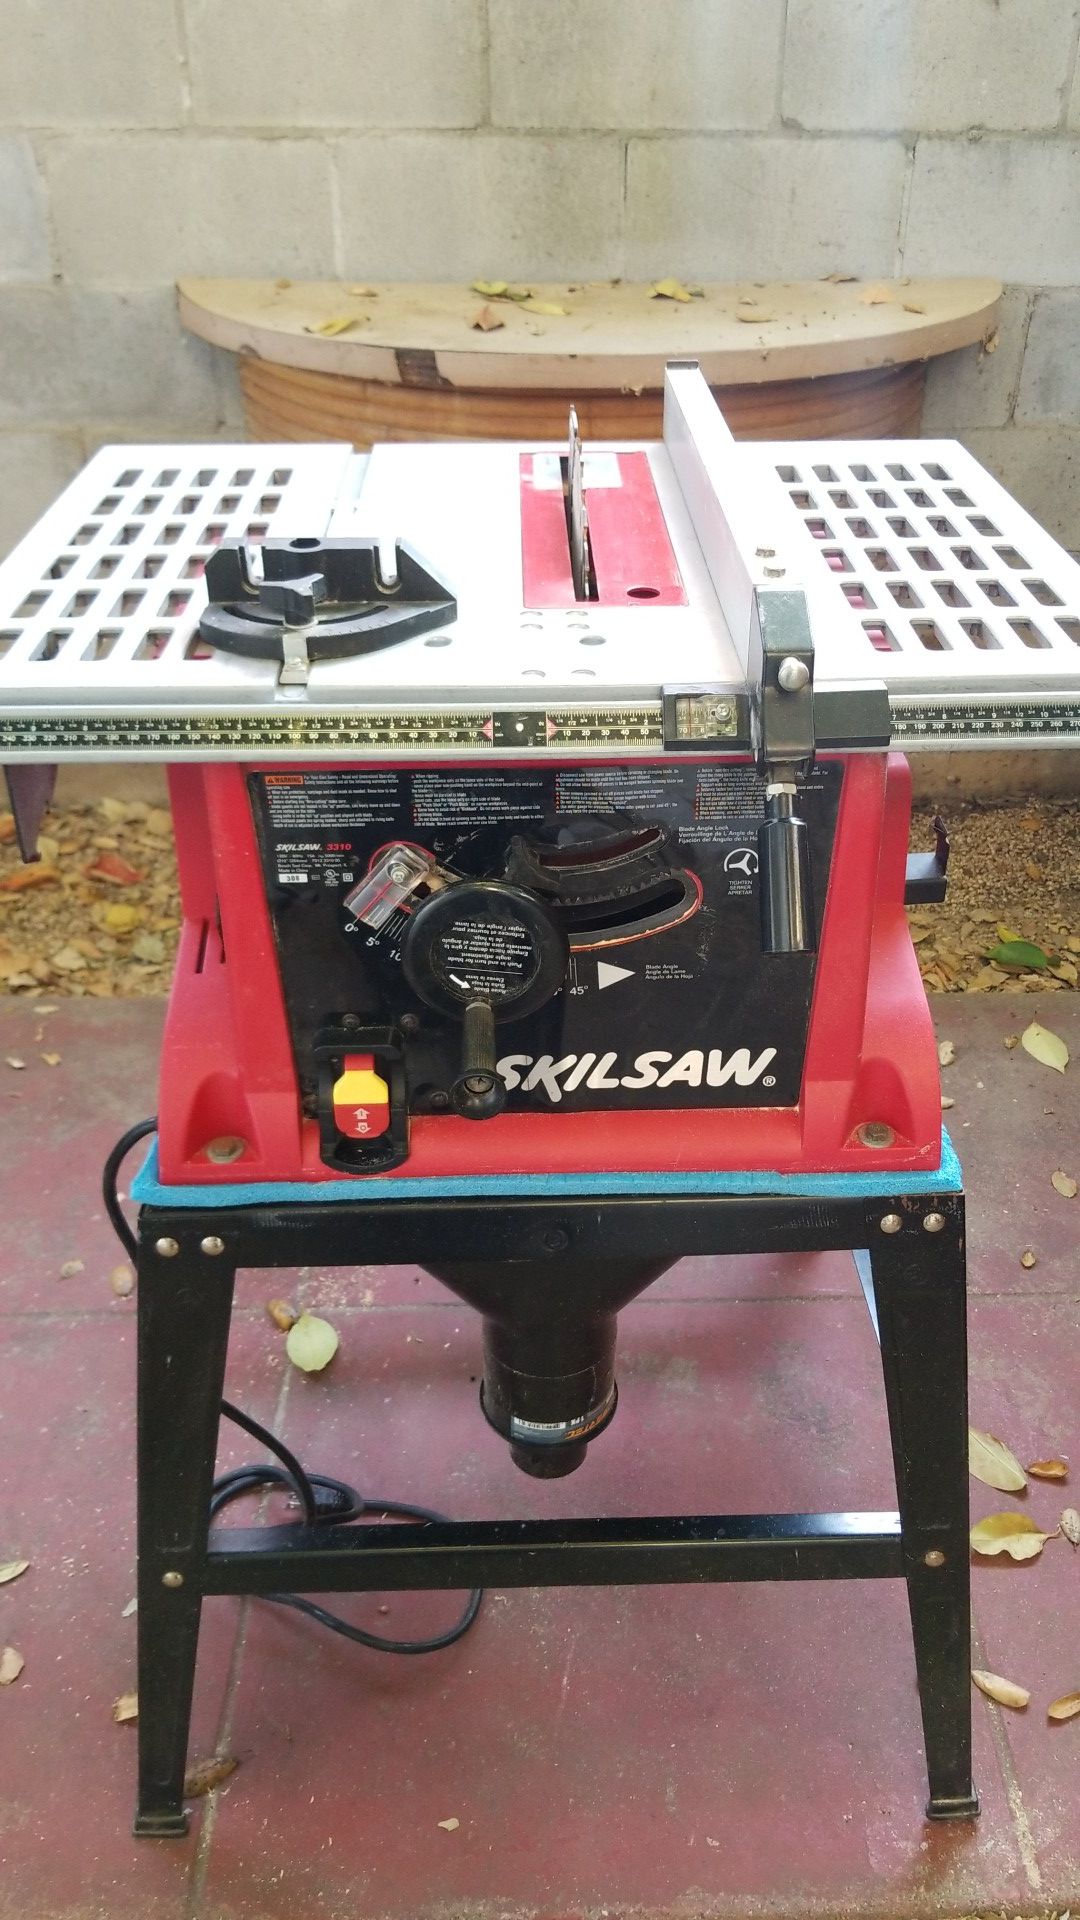 Skil 3310 10" 120V Table Saw - Works Great